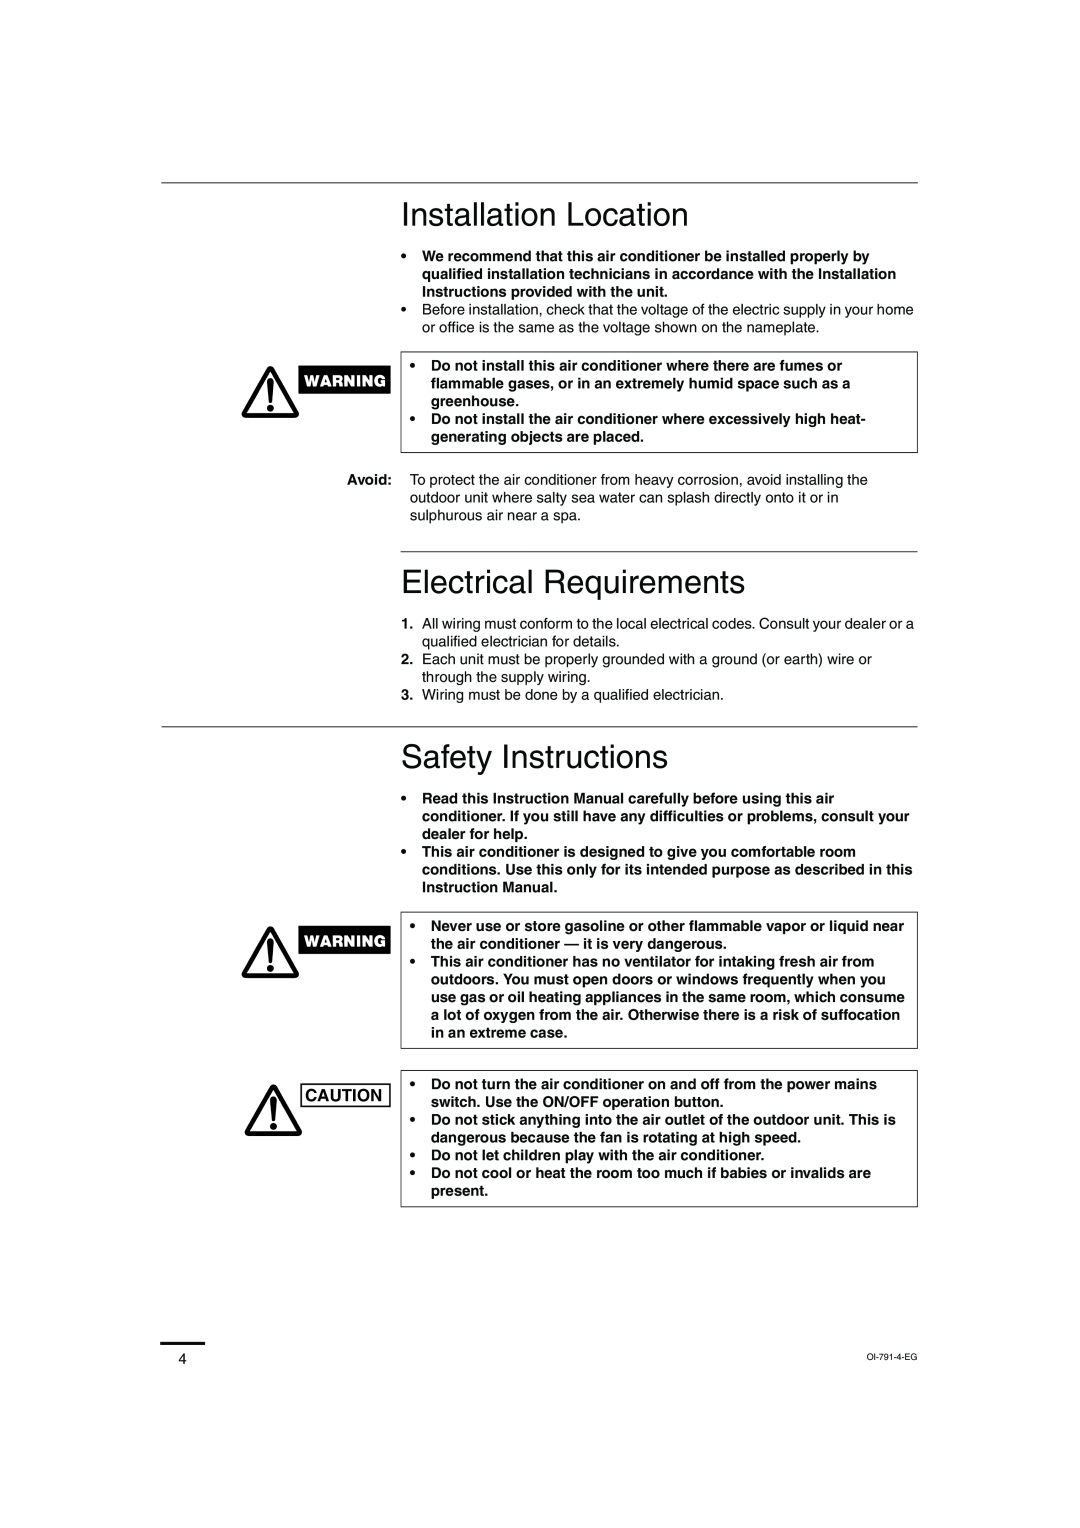 Sanyo SAP-KRV94EHDX service manual Installation Location, Electrical Requirements, Safety Instructions 